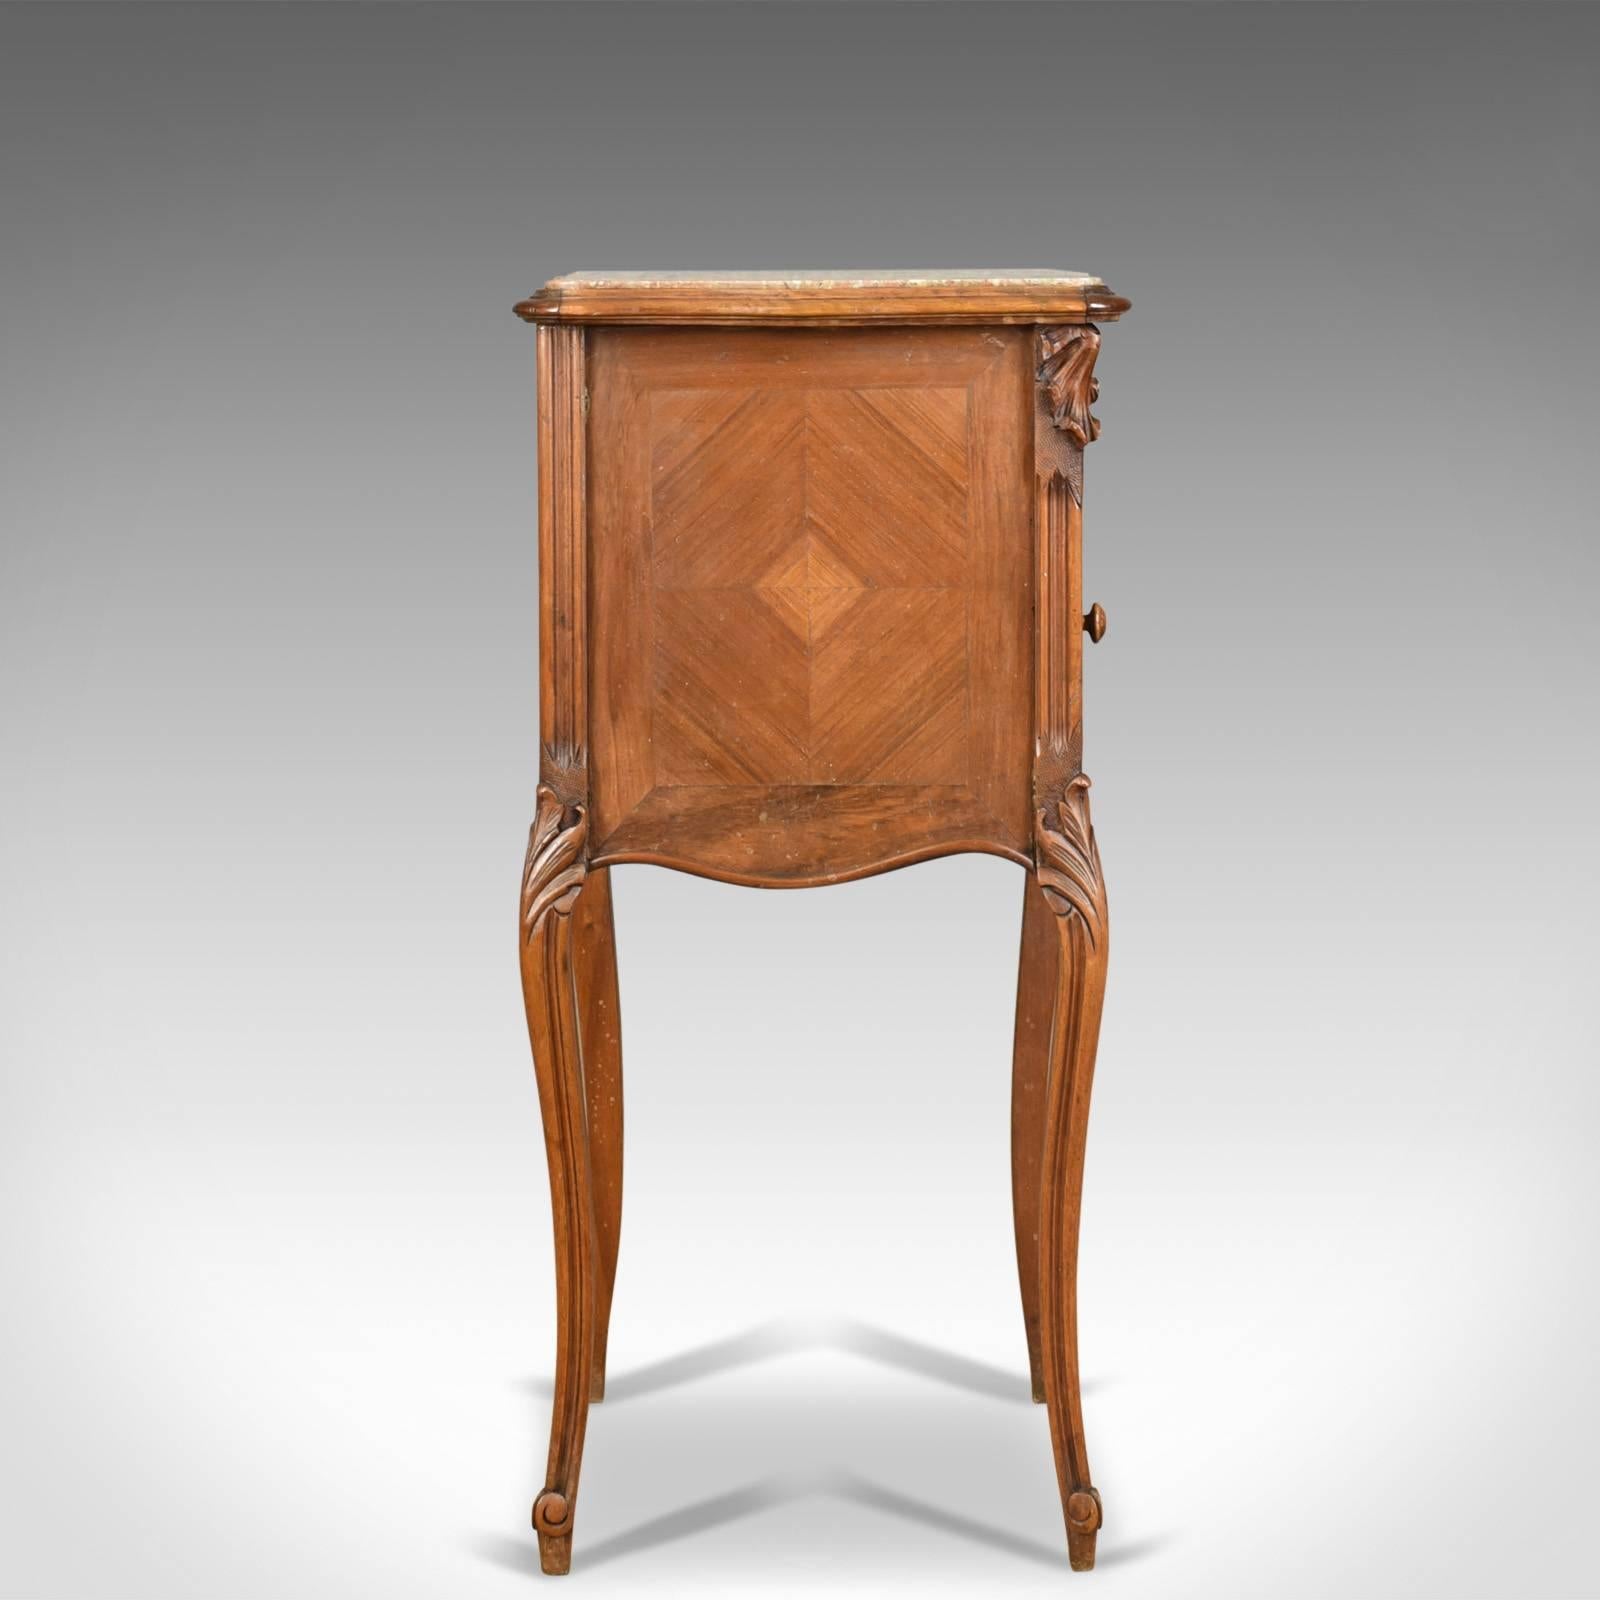 French Provincial Antique Bedside Cabinet French Walnut Marble Top Pot Cupboard, circa 1890